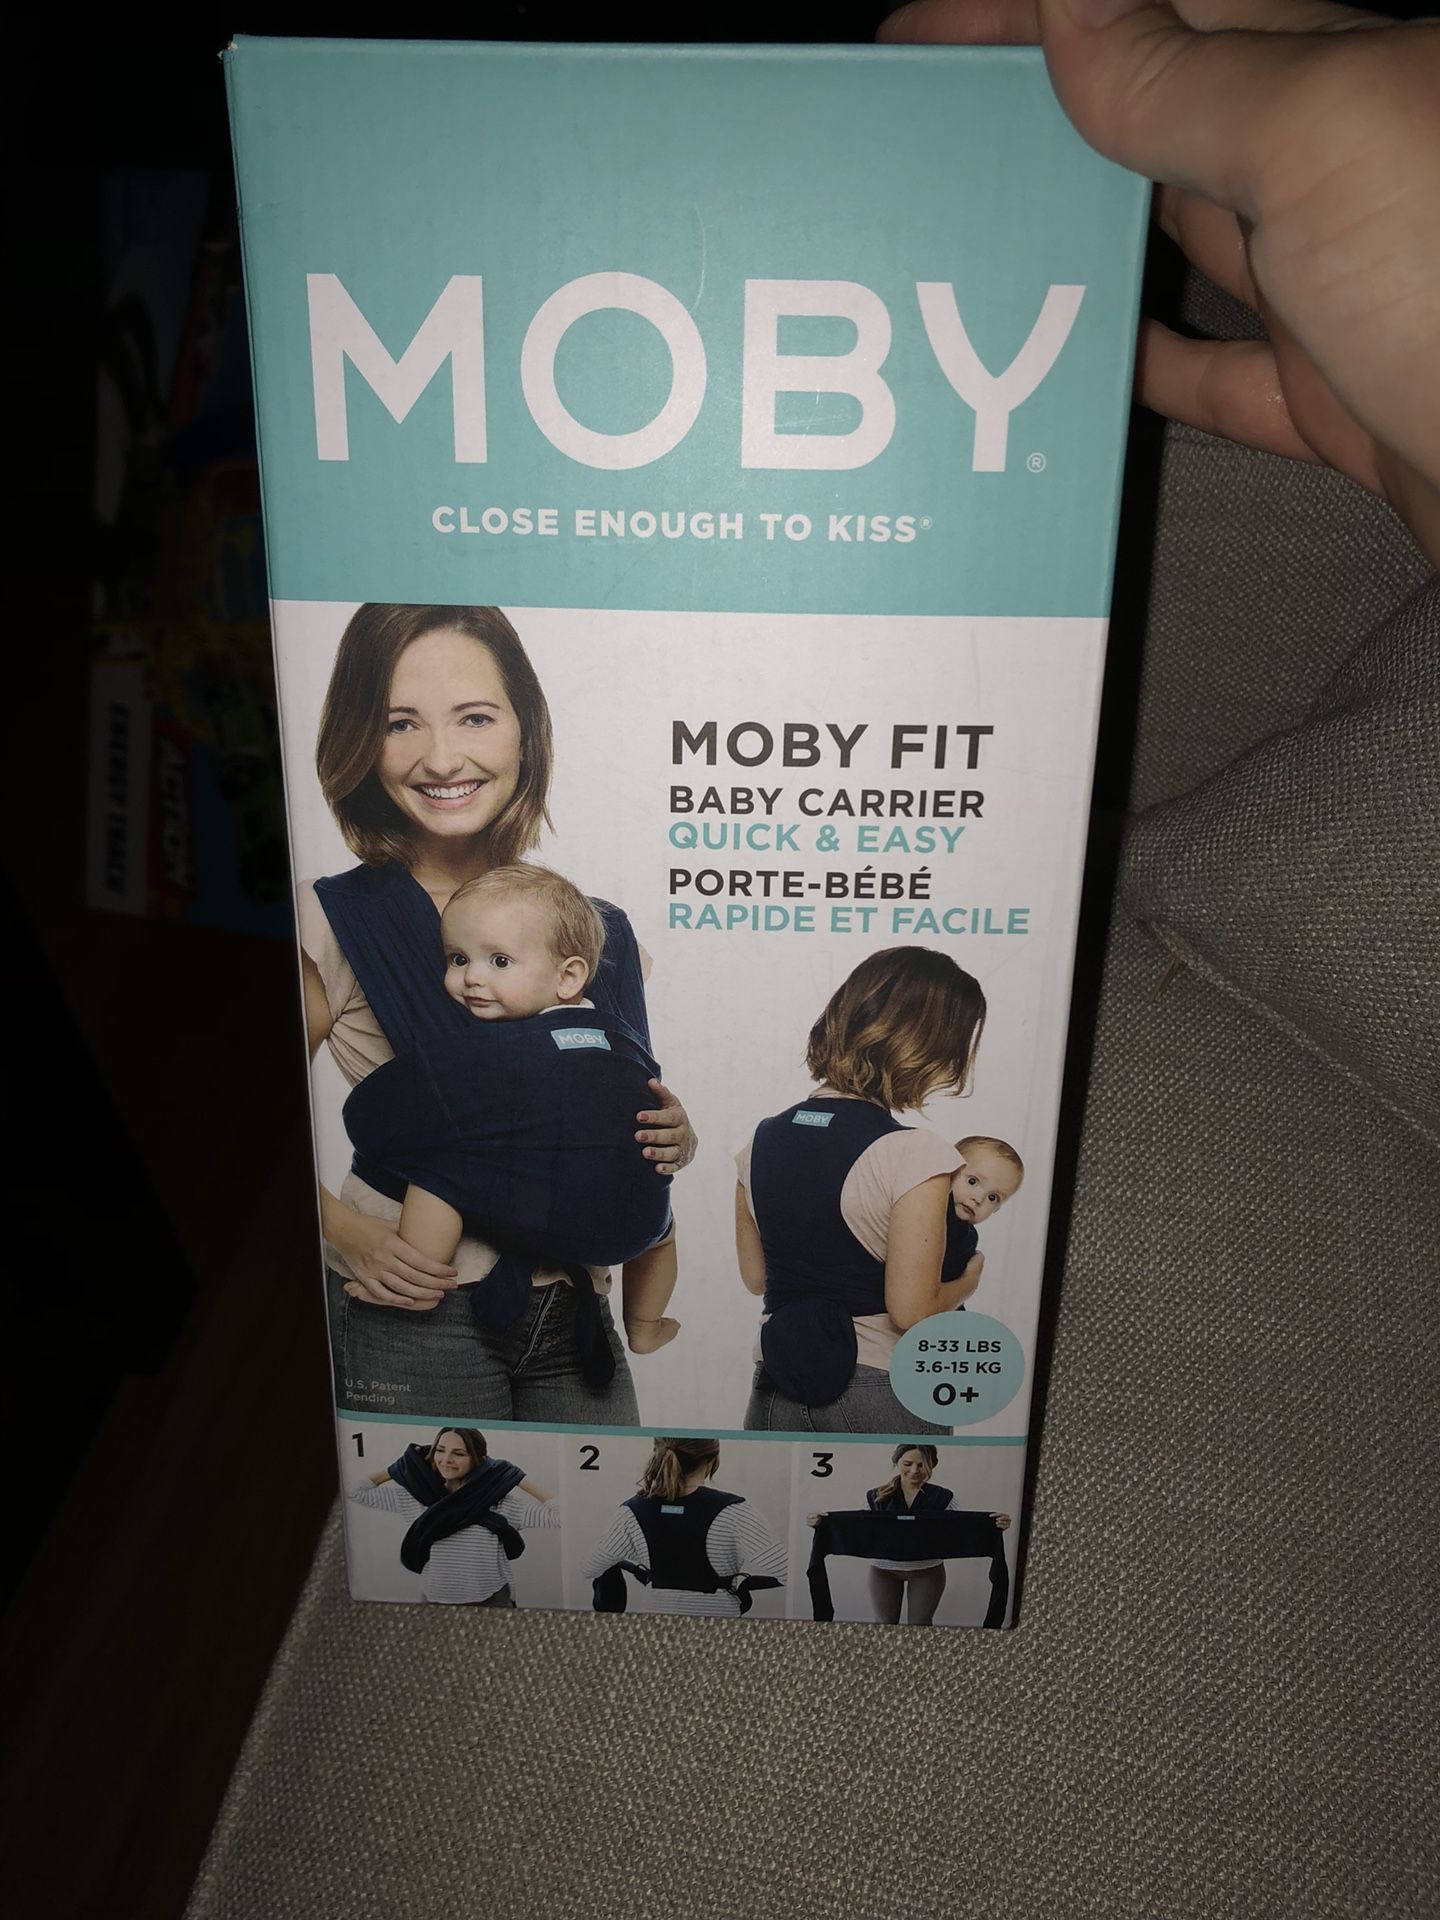 Moby fit baby carrier for sale! Never used!